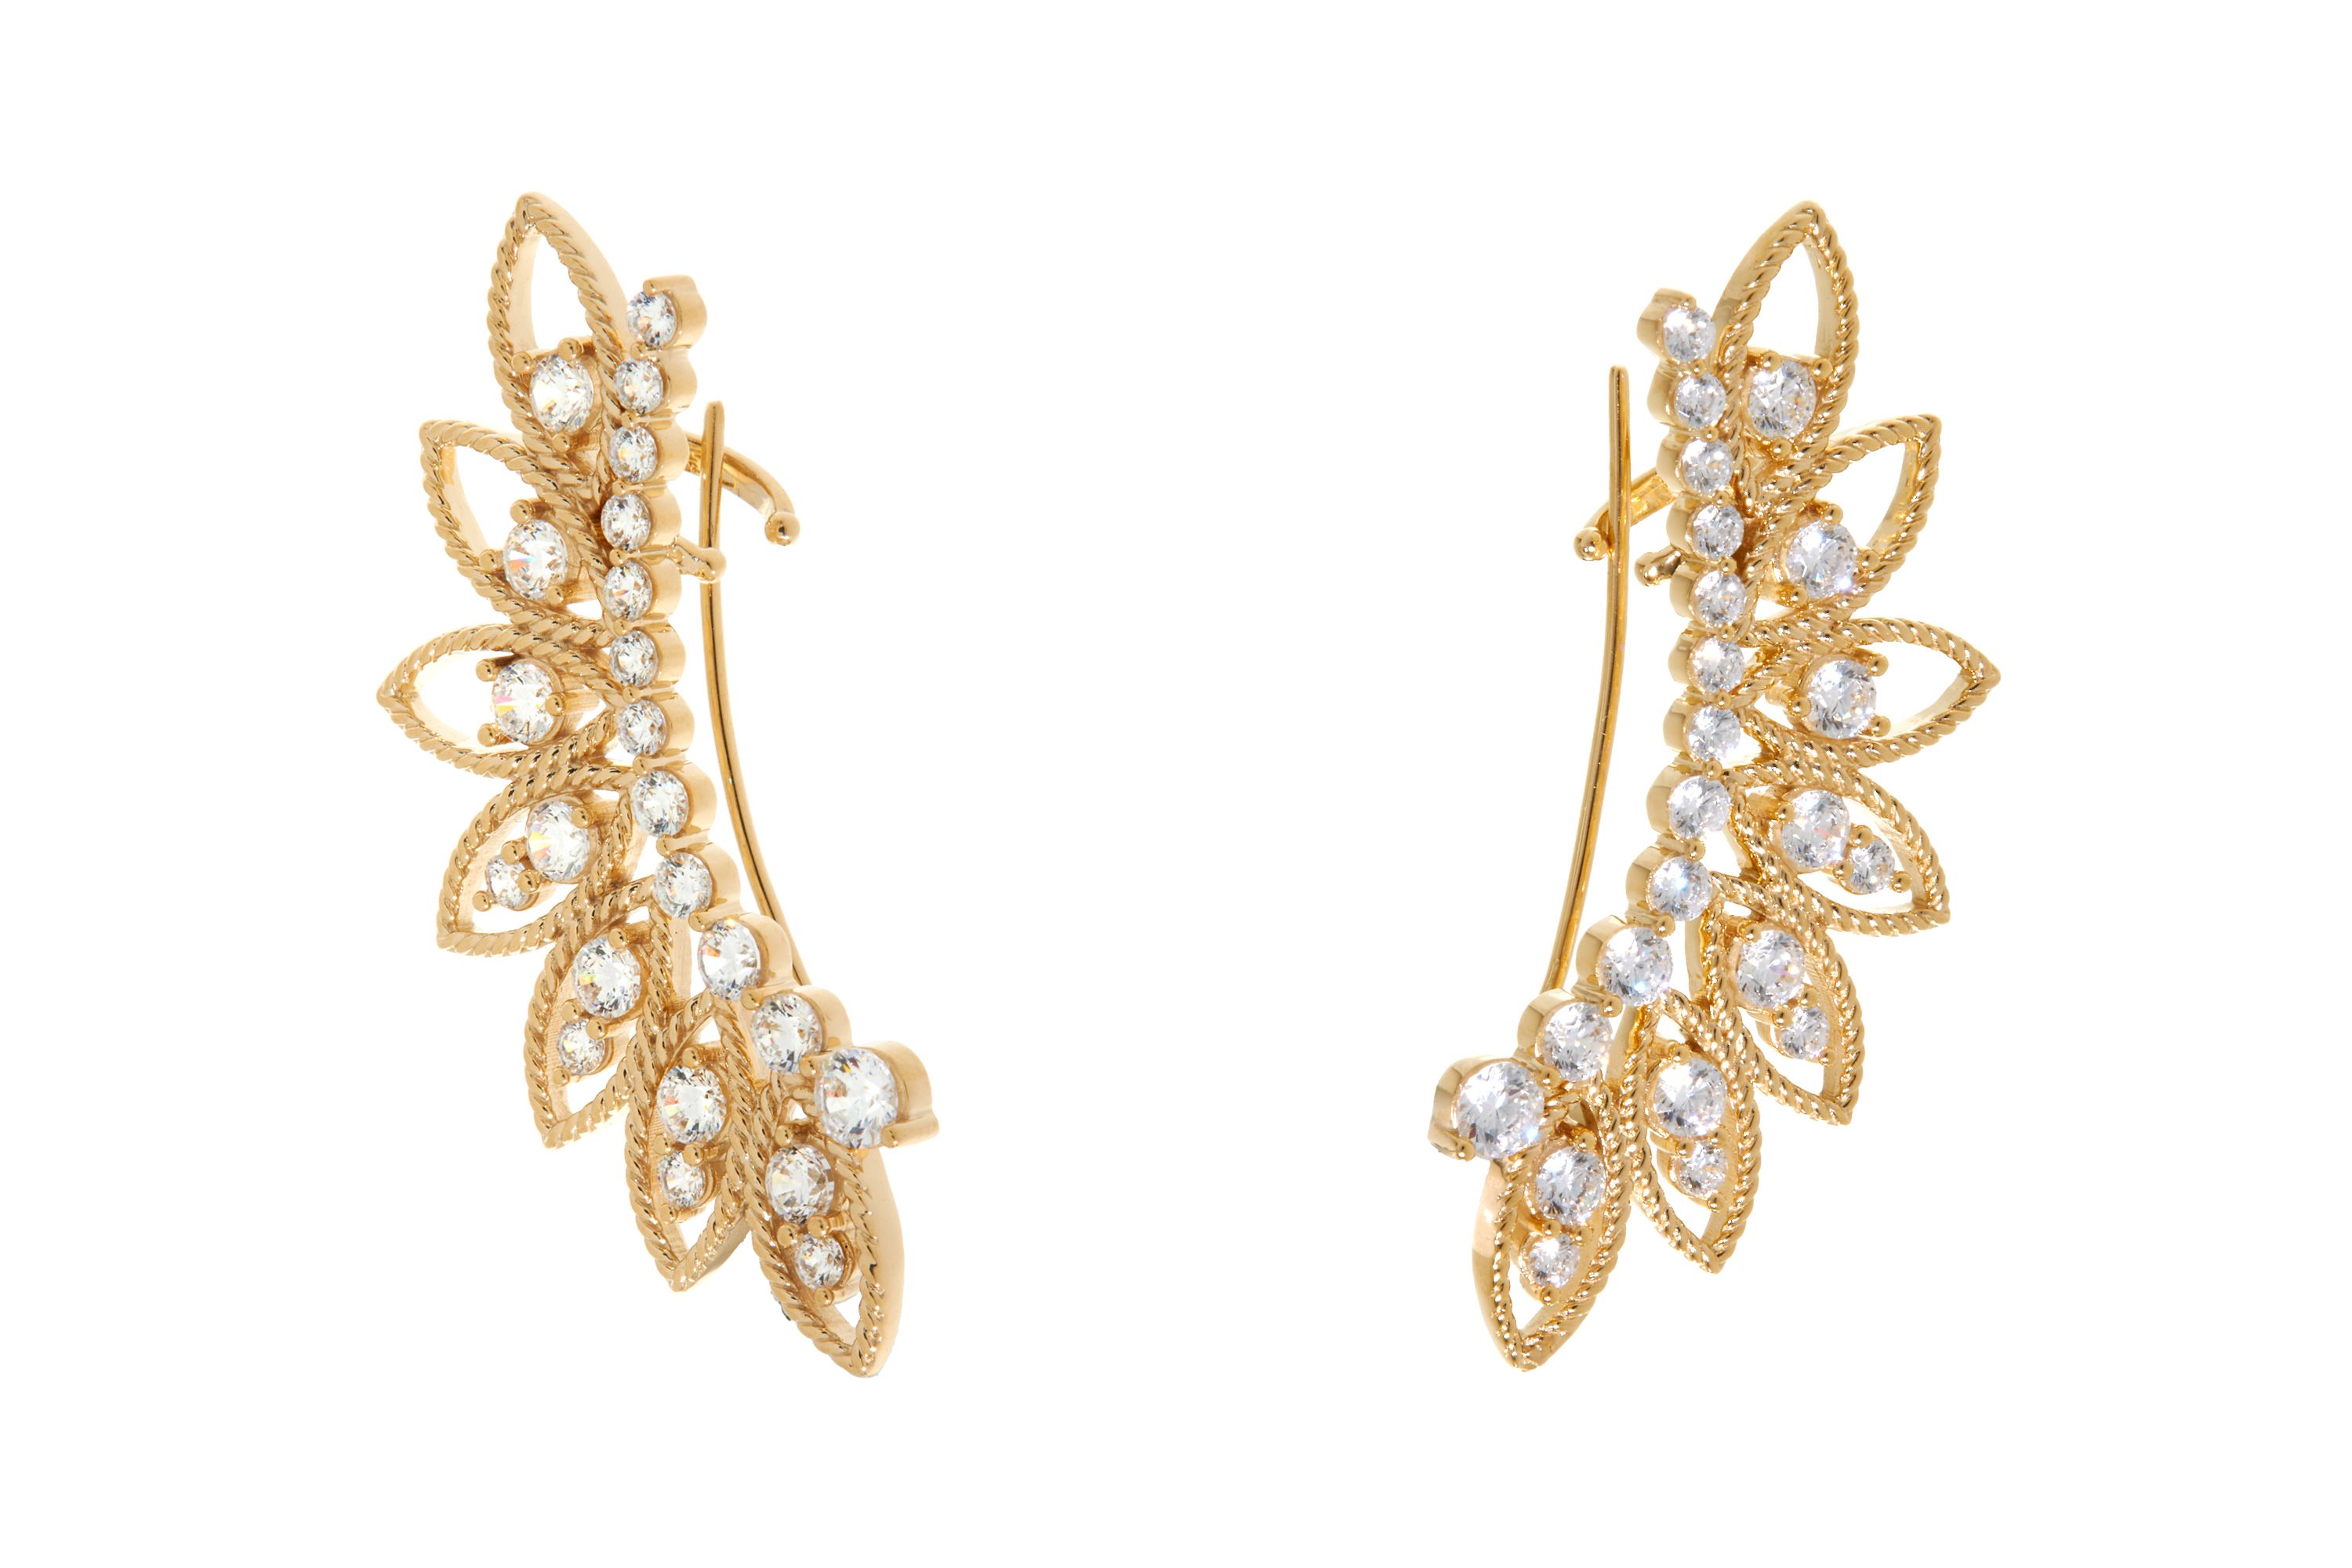 Judith Leiber Launches First Jewelry Line